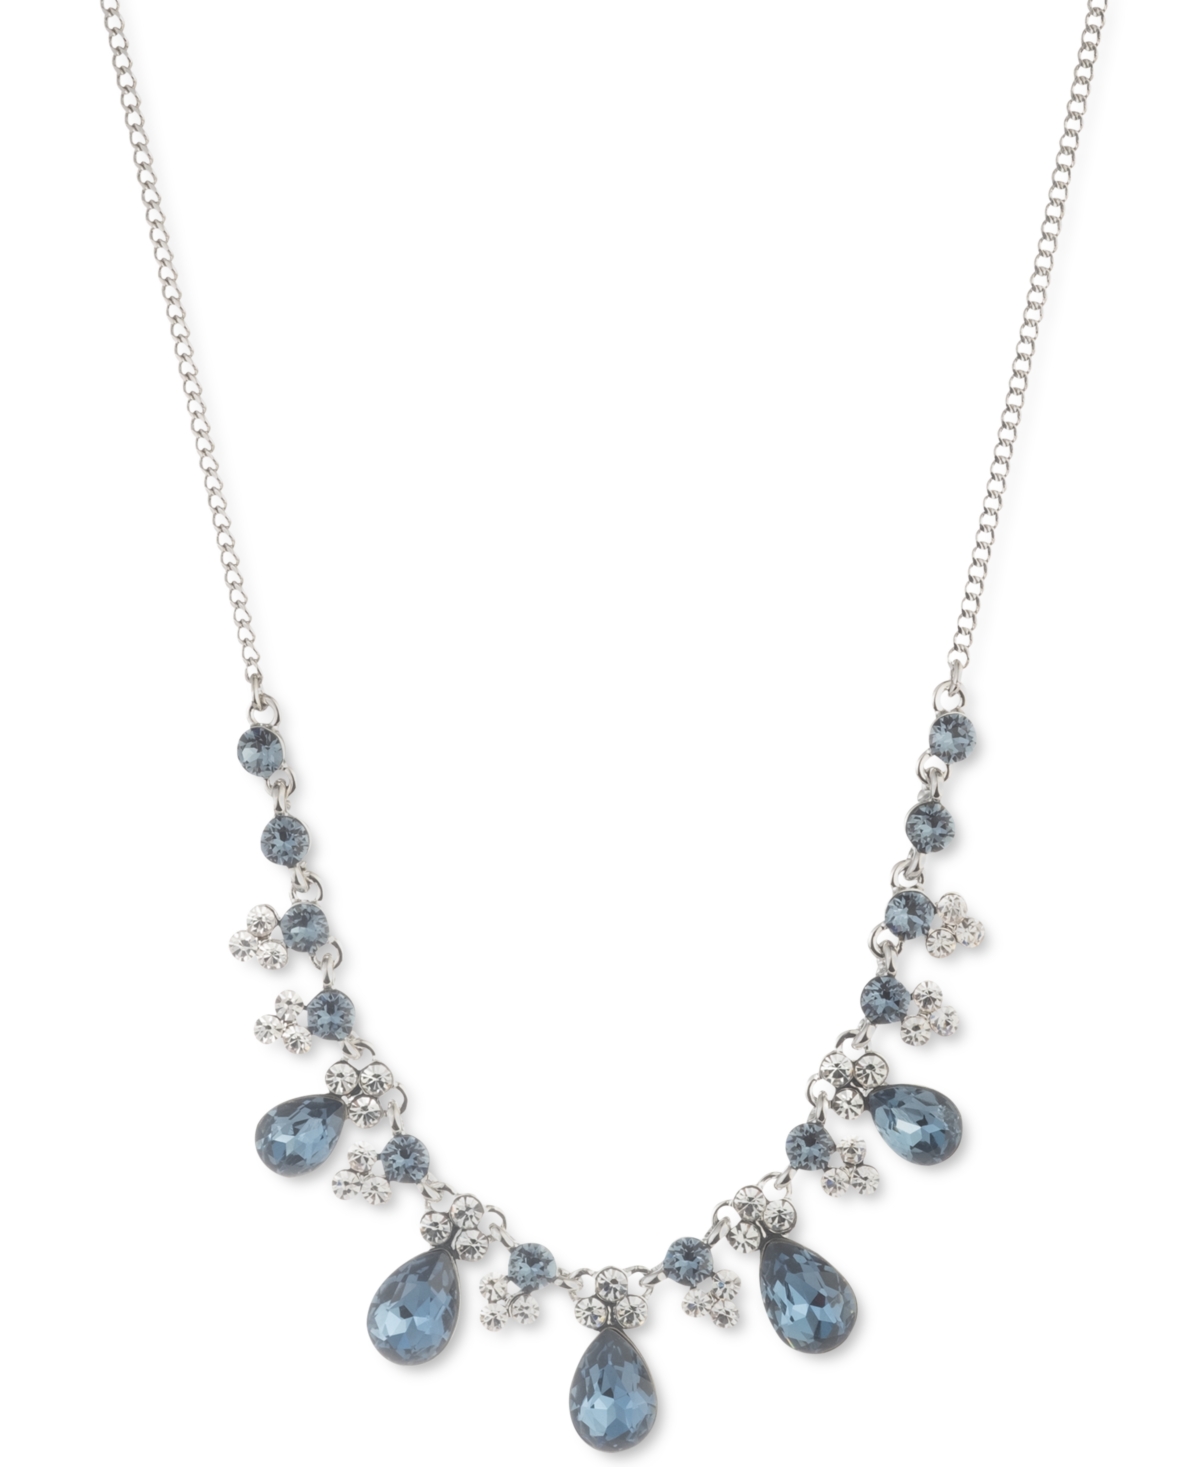 Pear-Shape Crystal Statement Necklace, 16" + 3" extender - Silver